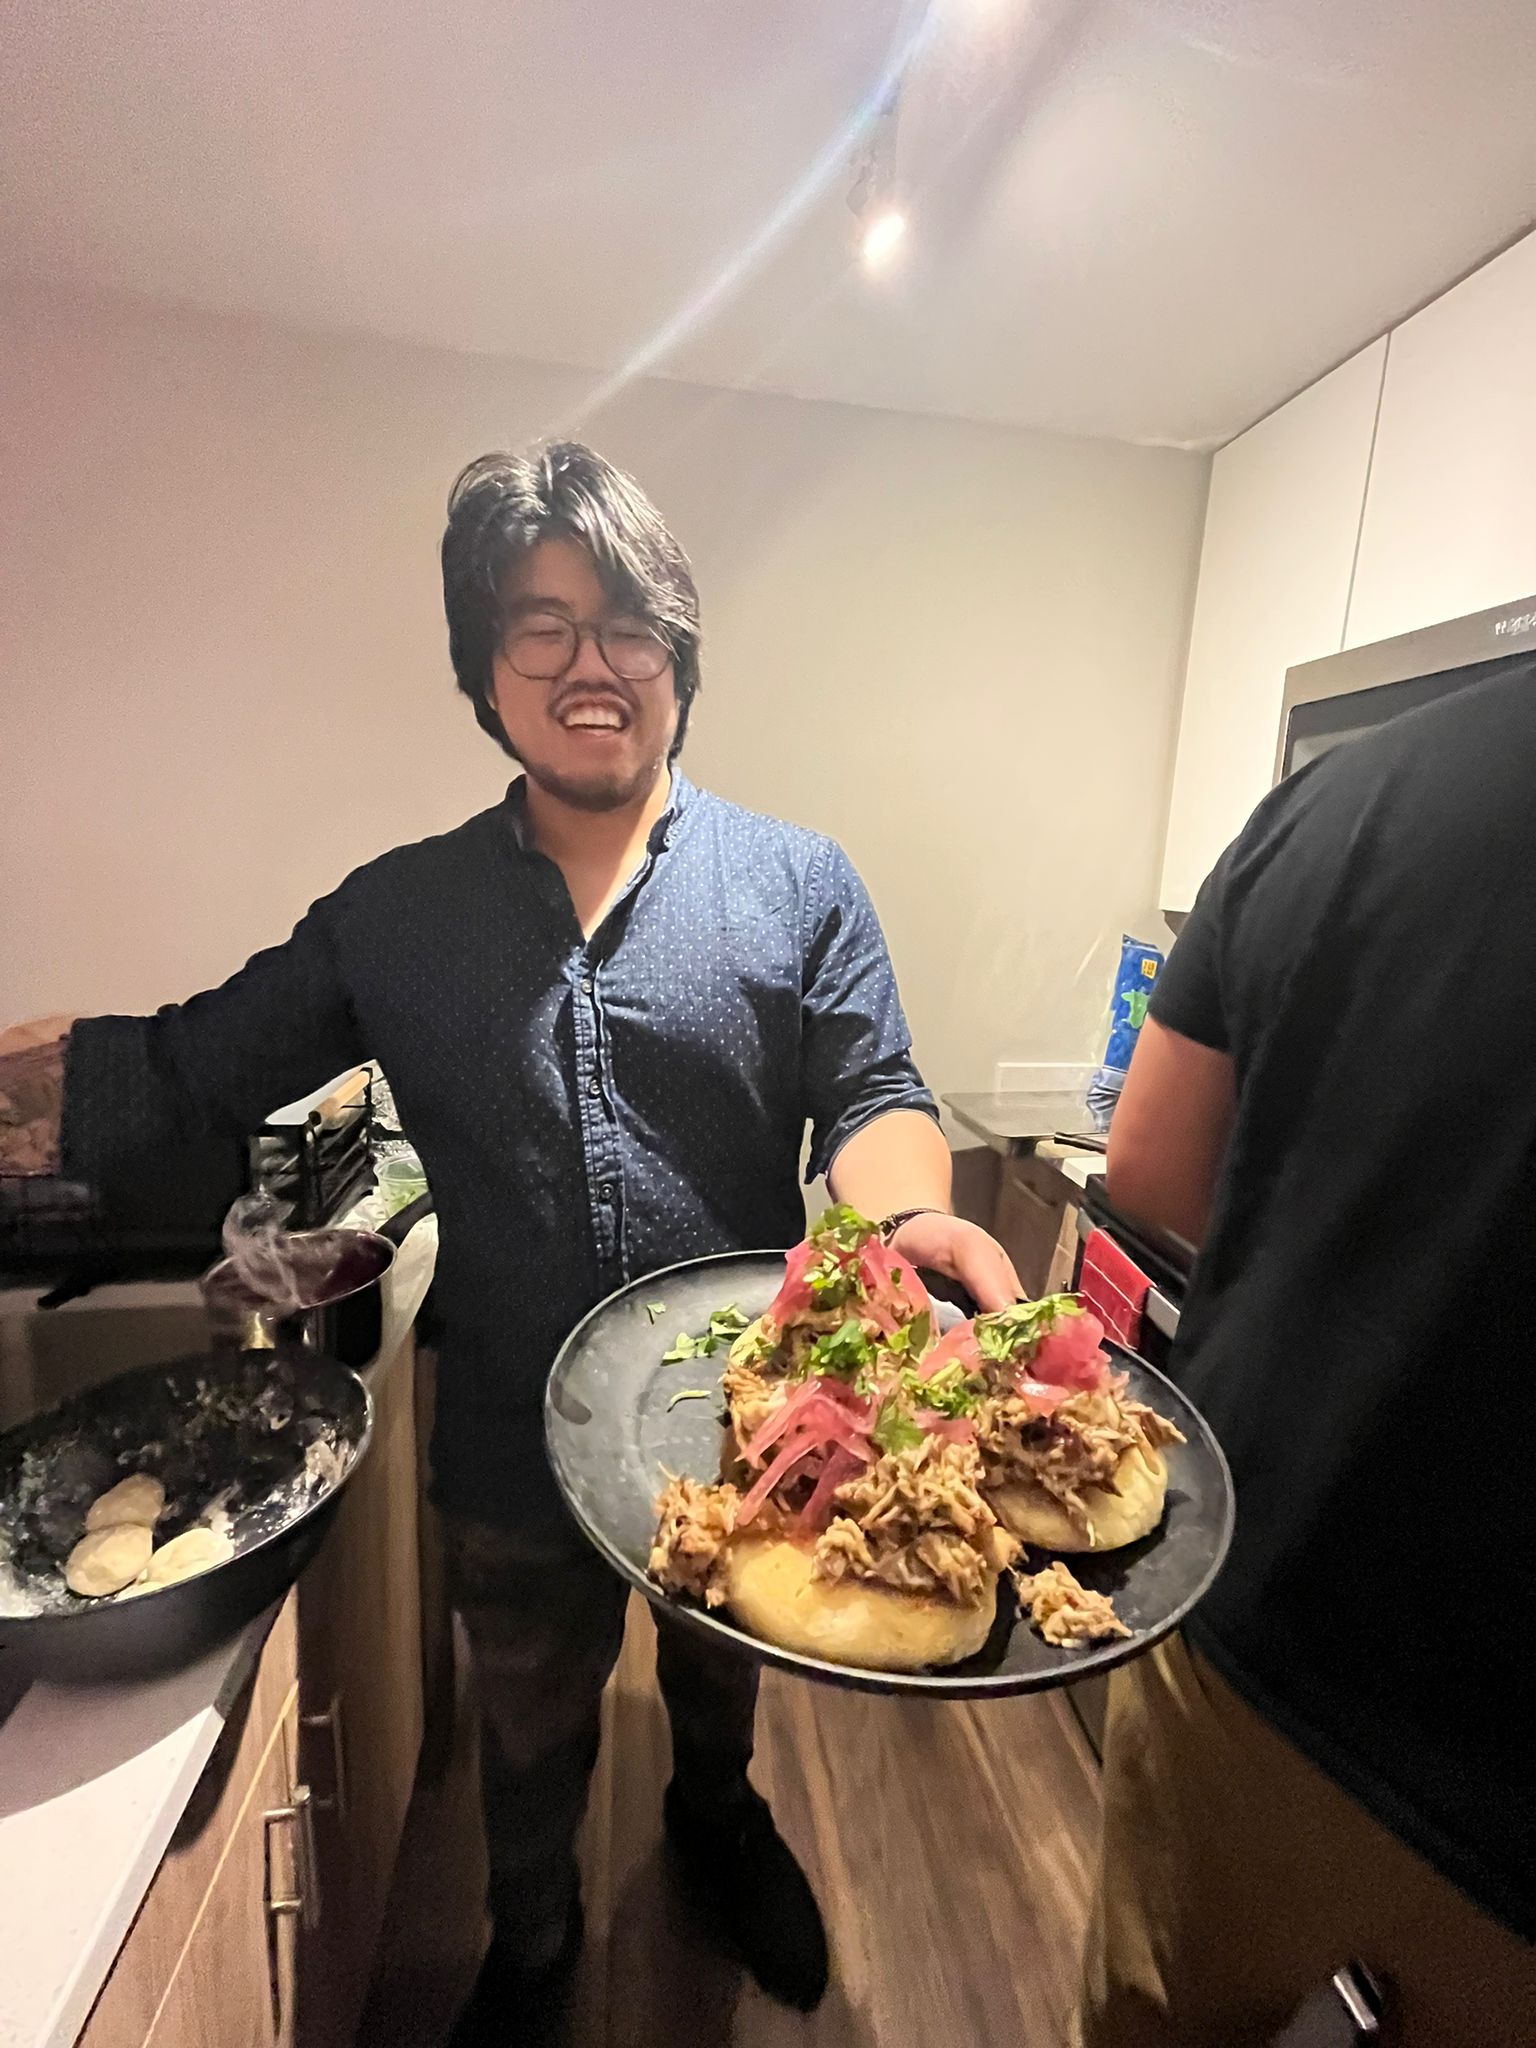 Ryan Lee with a plate of food that he prepared